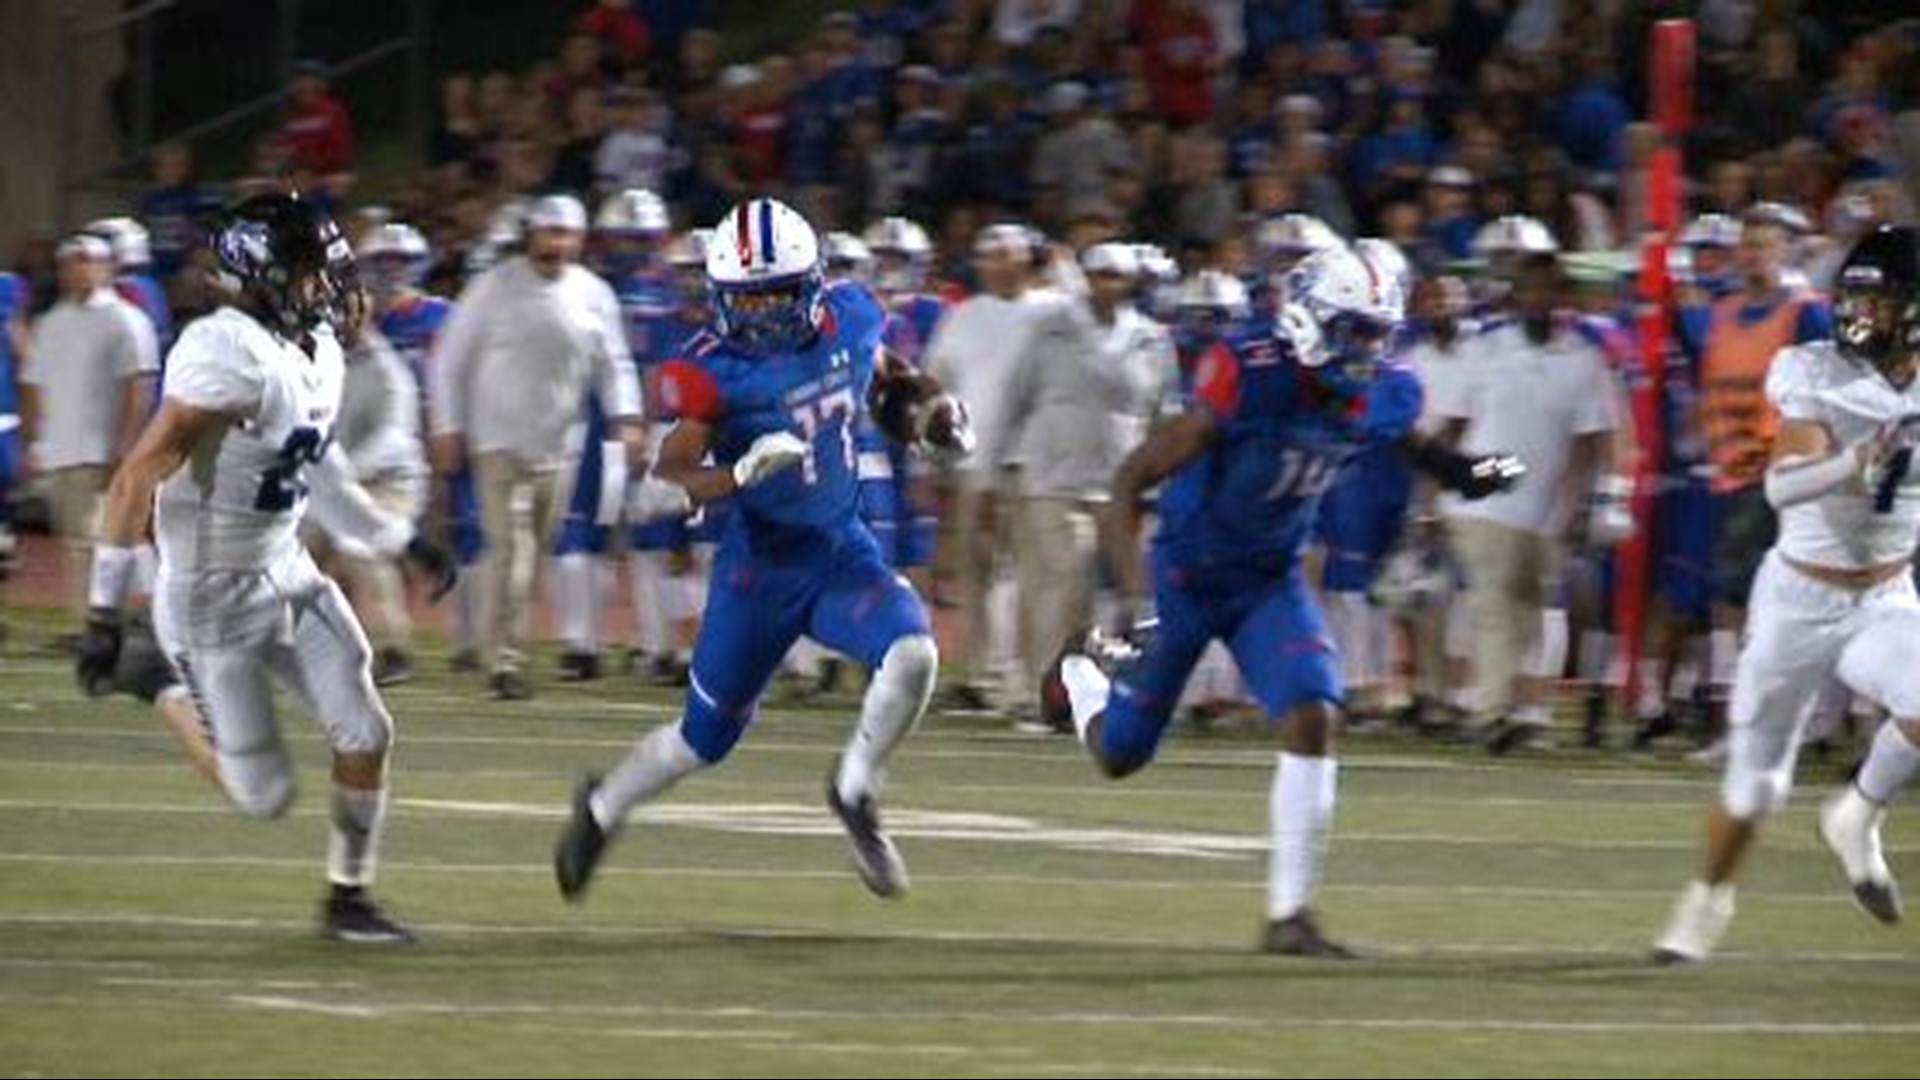 Cherry Creek improves to 6-1 after topping Grandview 21-13 on homecoming weekend.